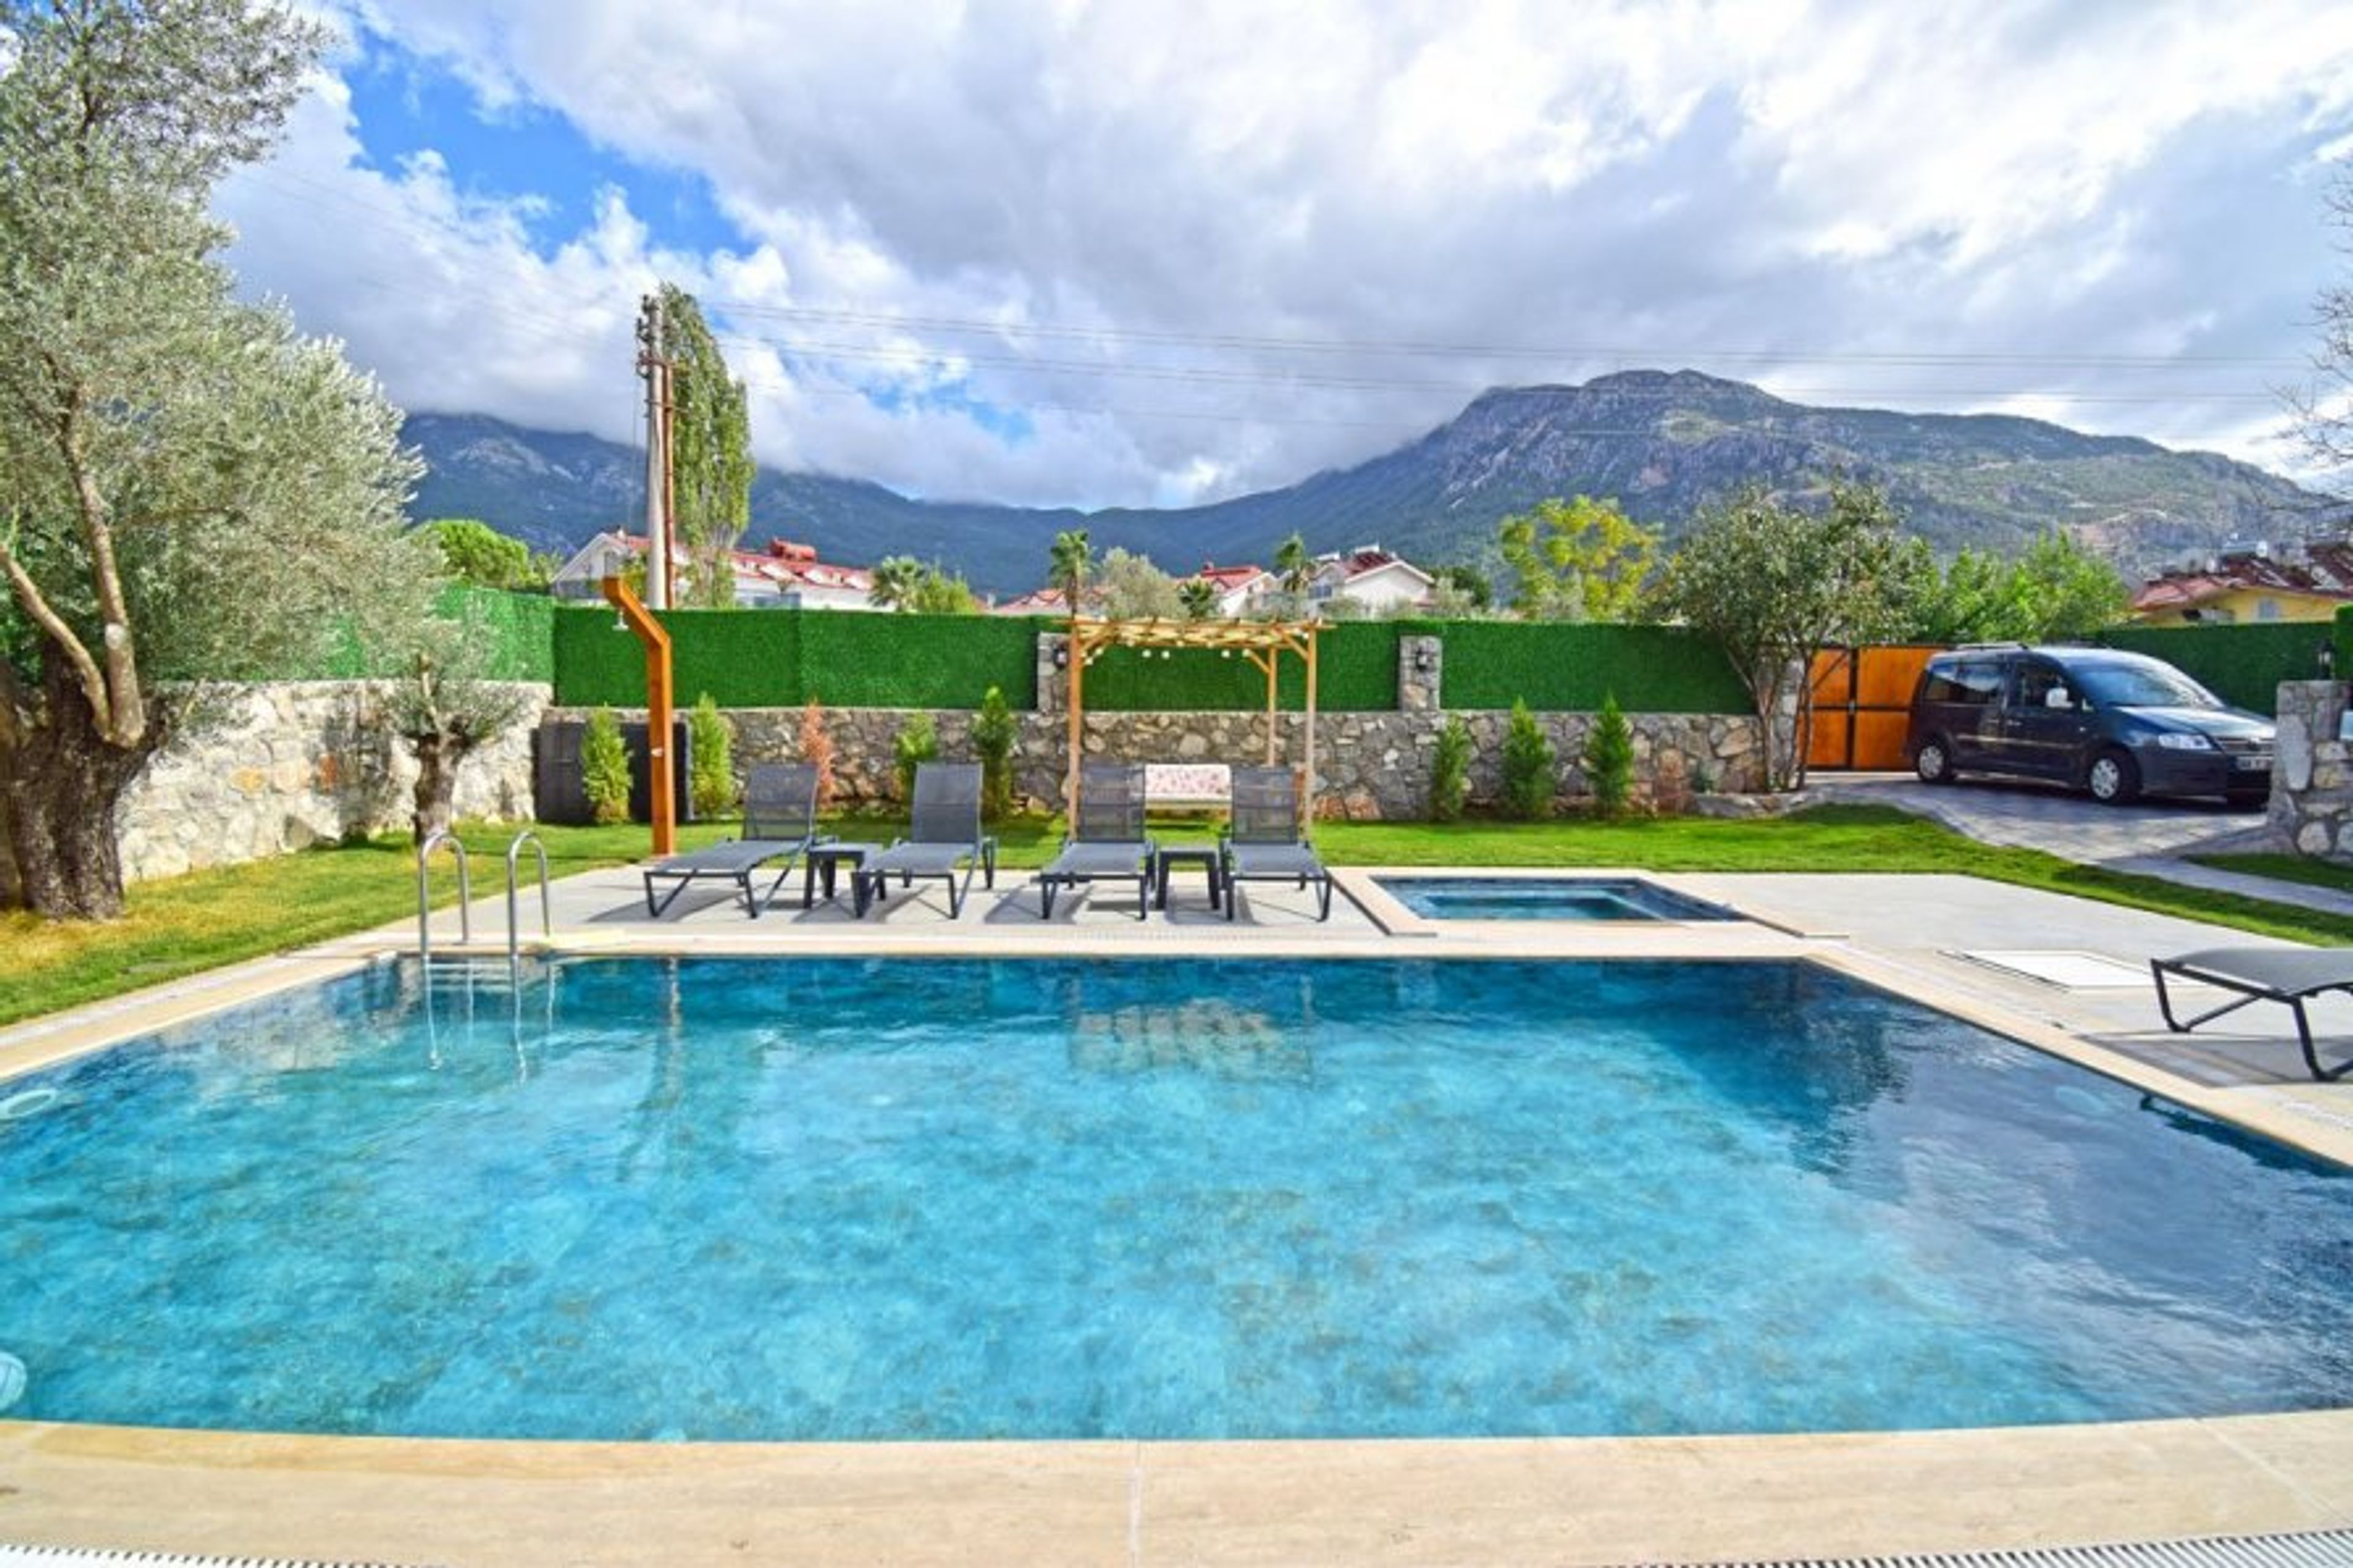 Private and Well-kept Garden & Pool Area with Babadag Mountain View